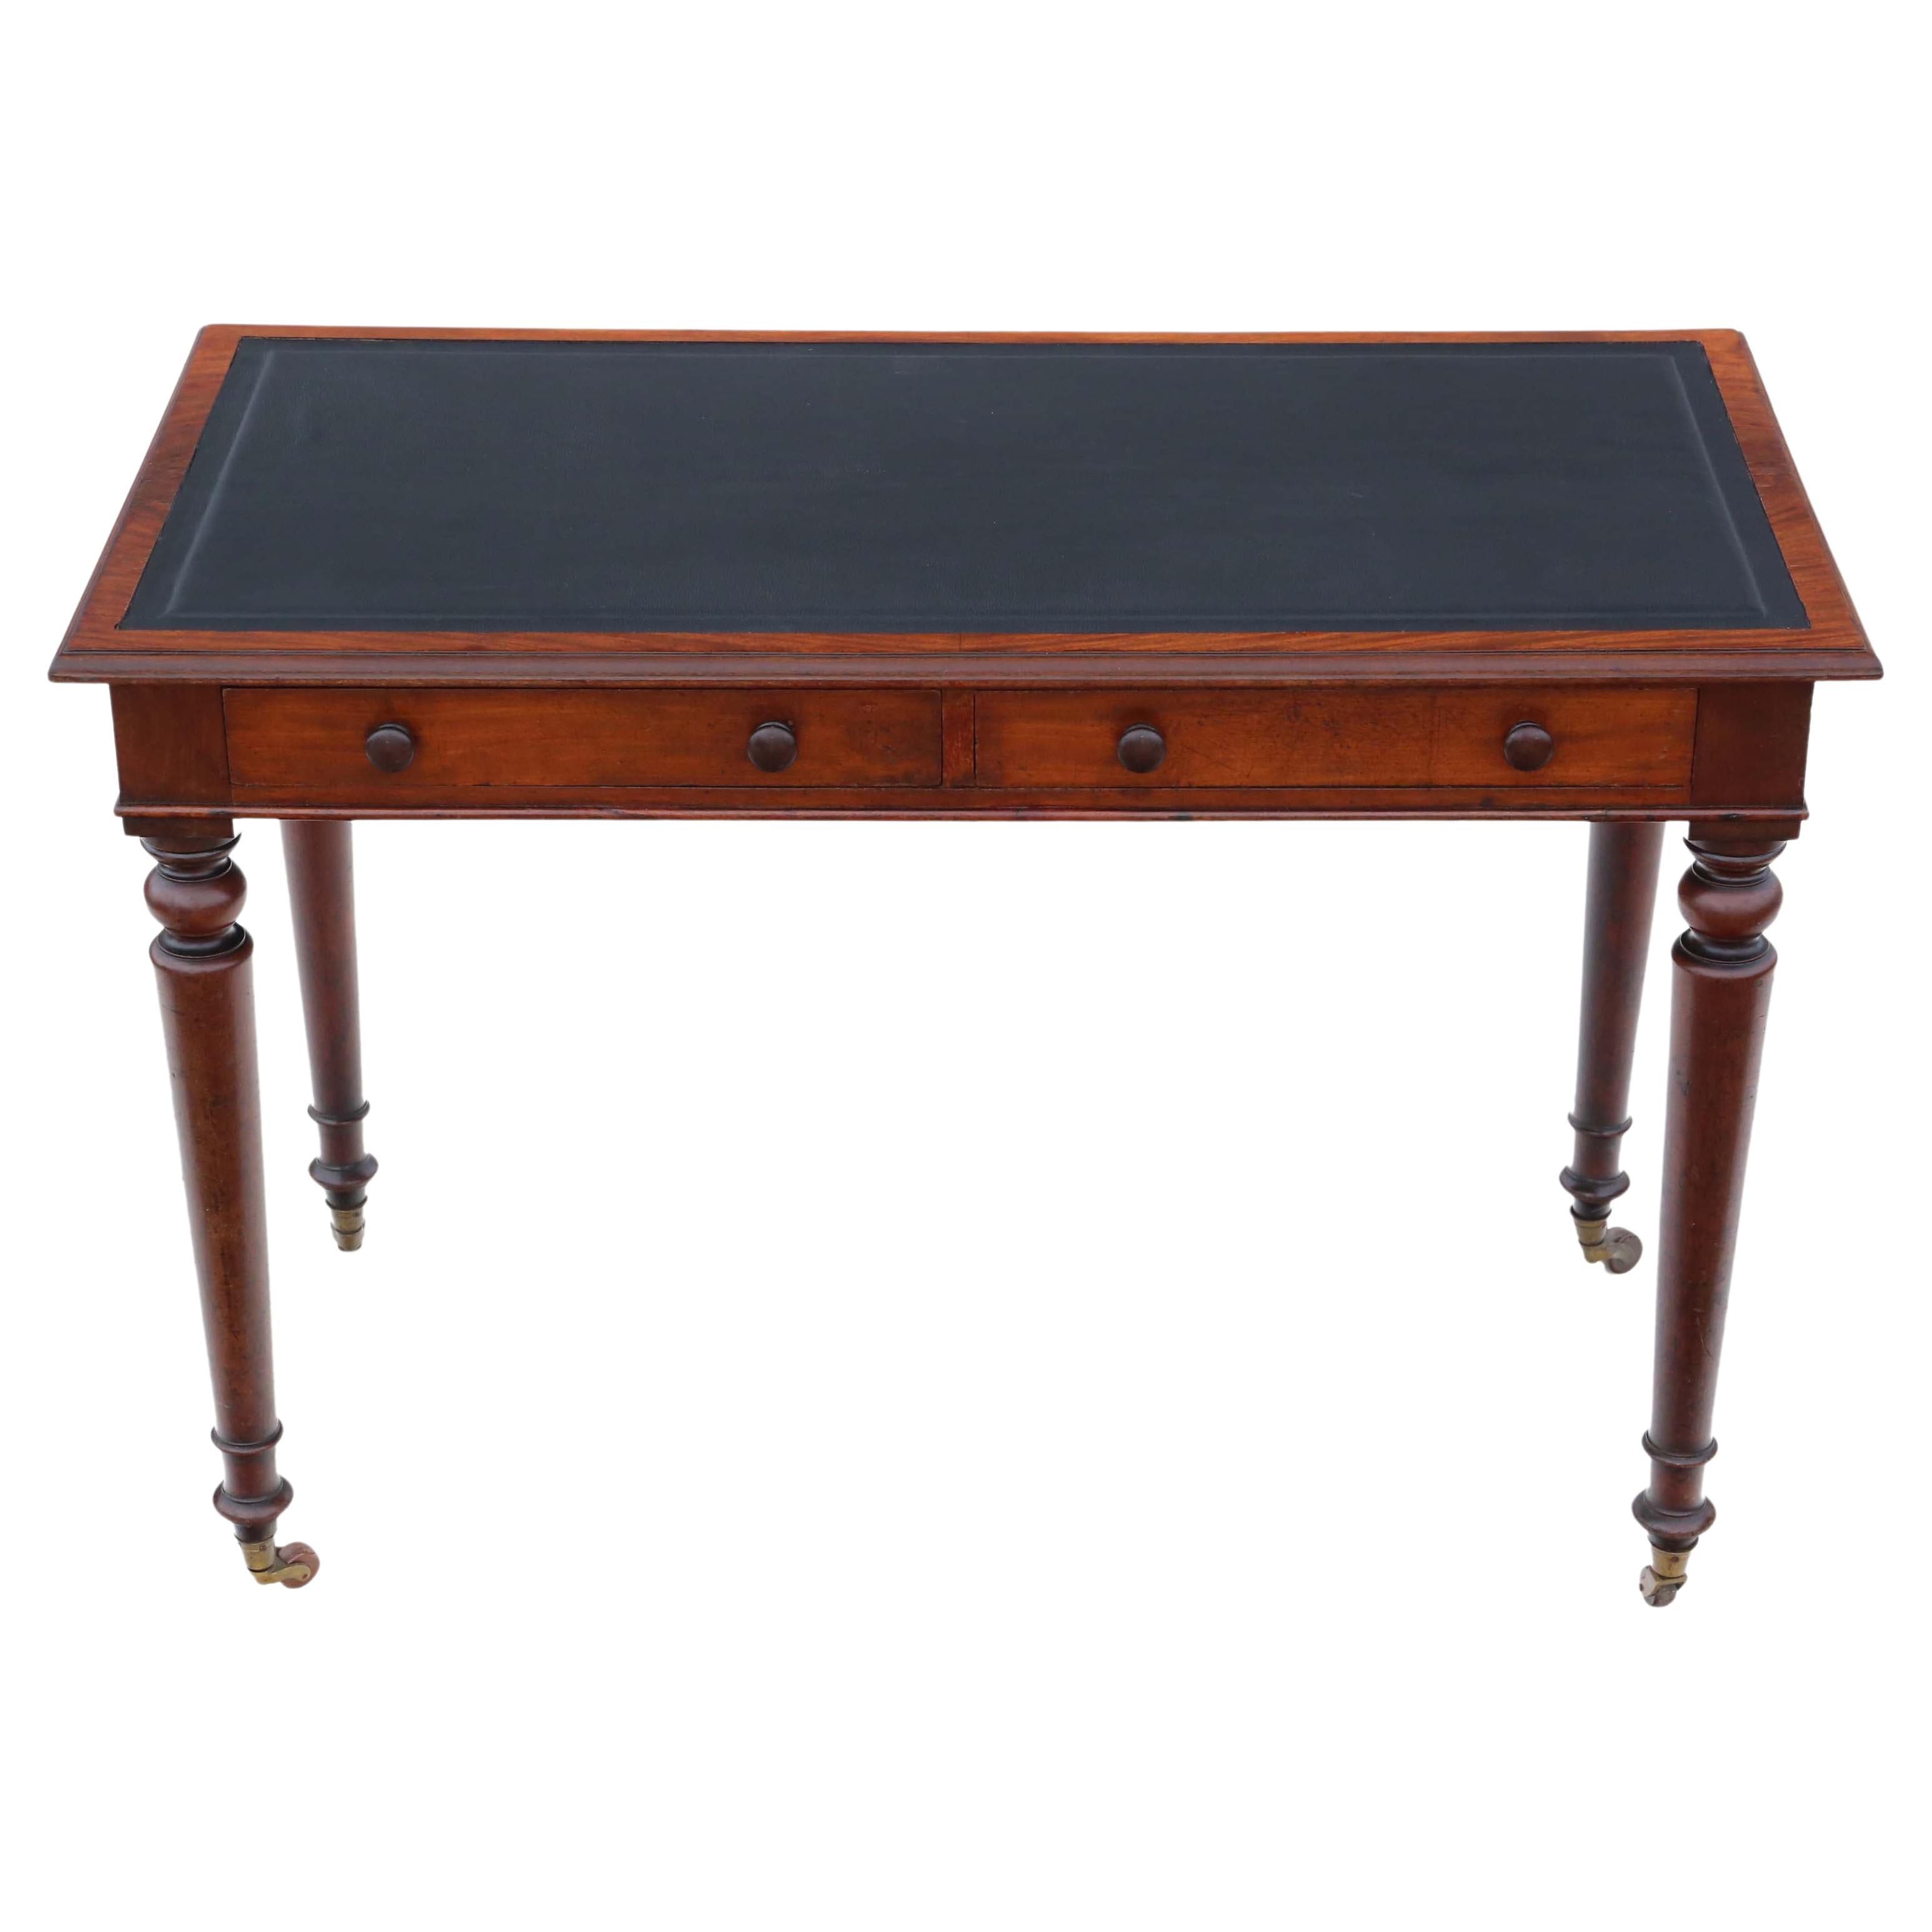 Antique Fine Quality 19th Century Mahogany Writing Side Table Desk C1850